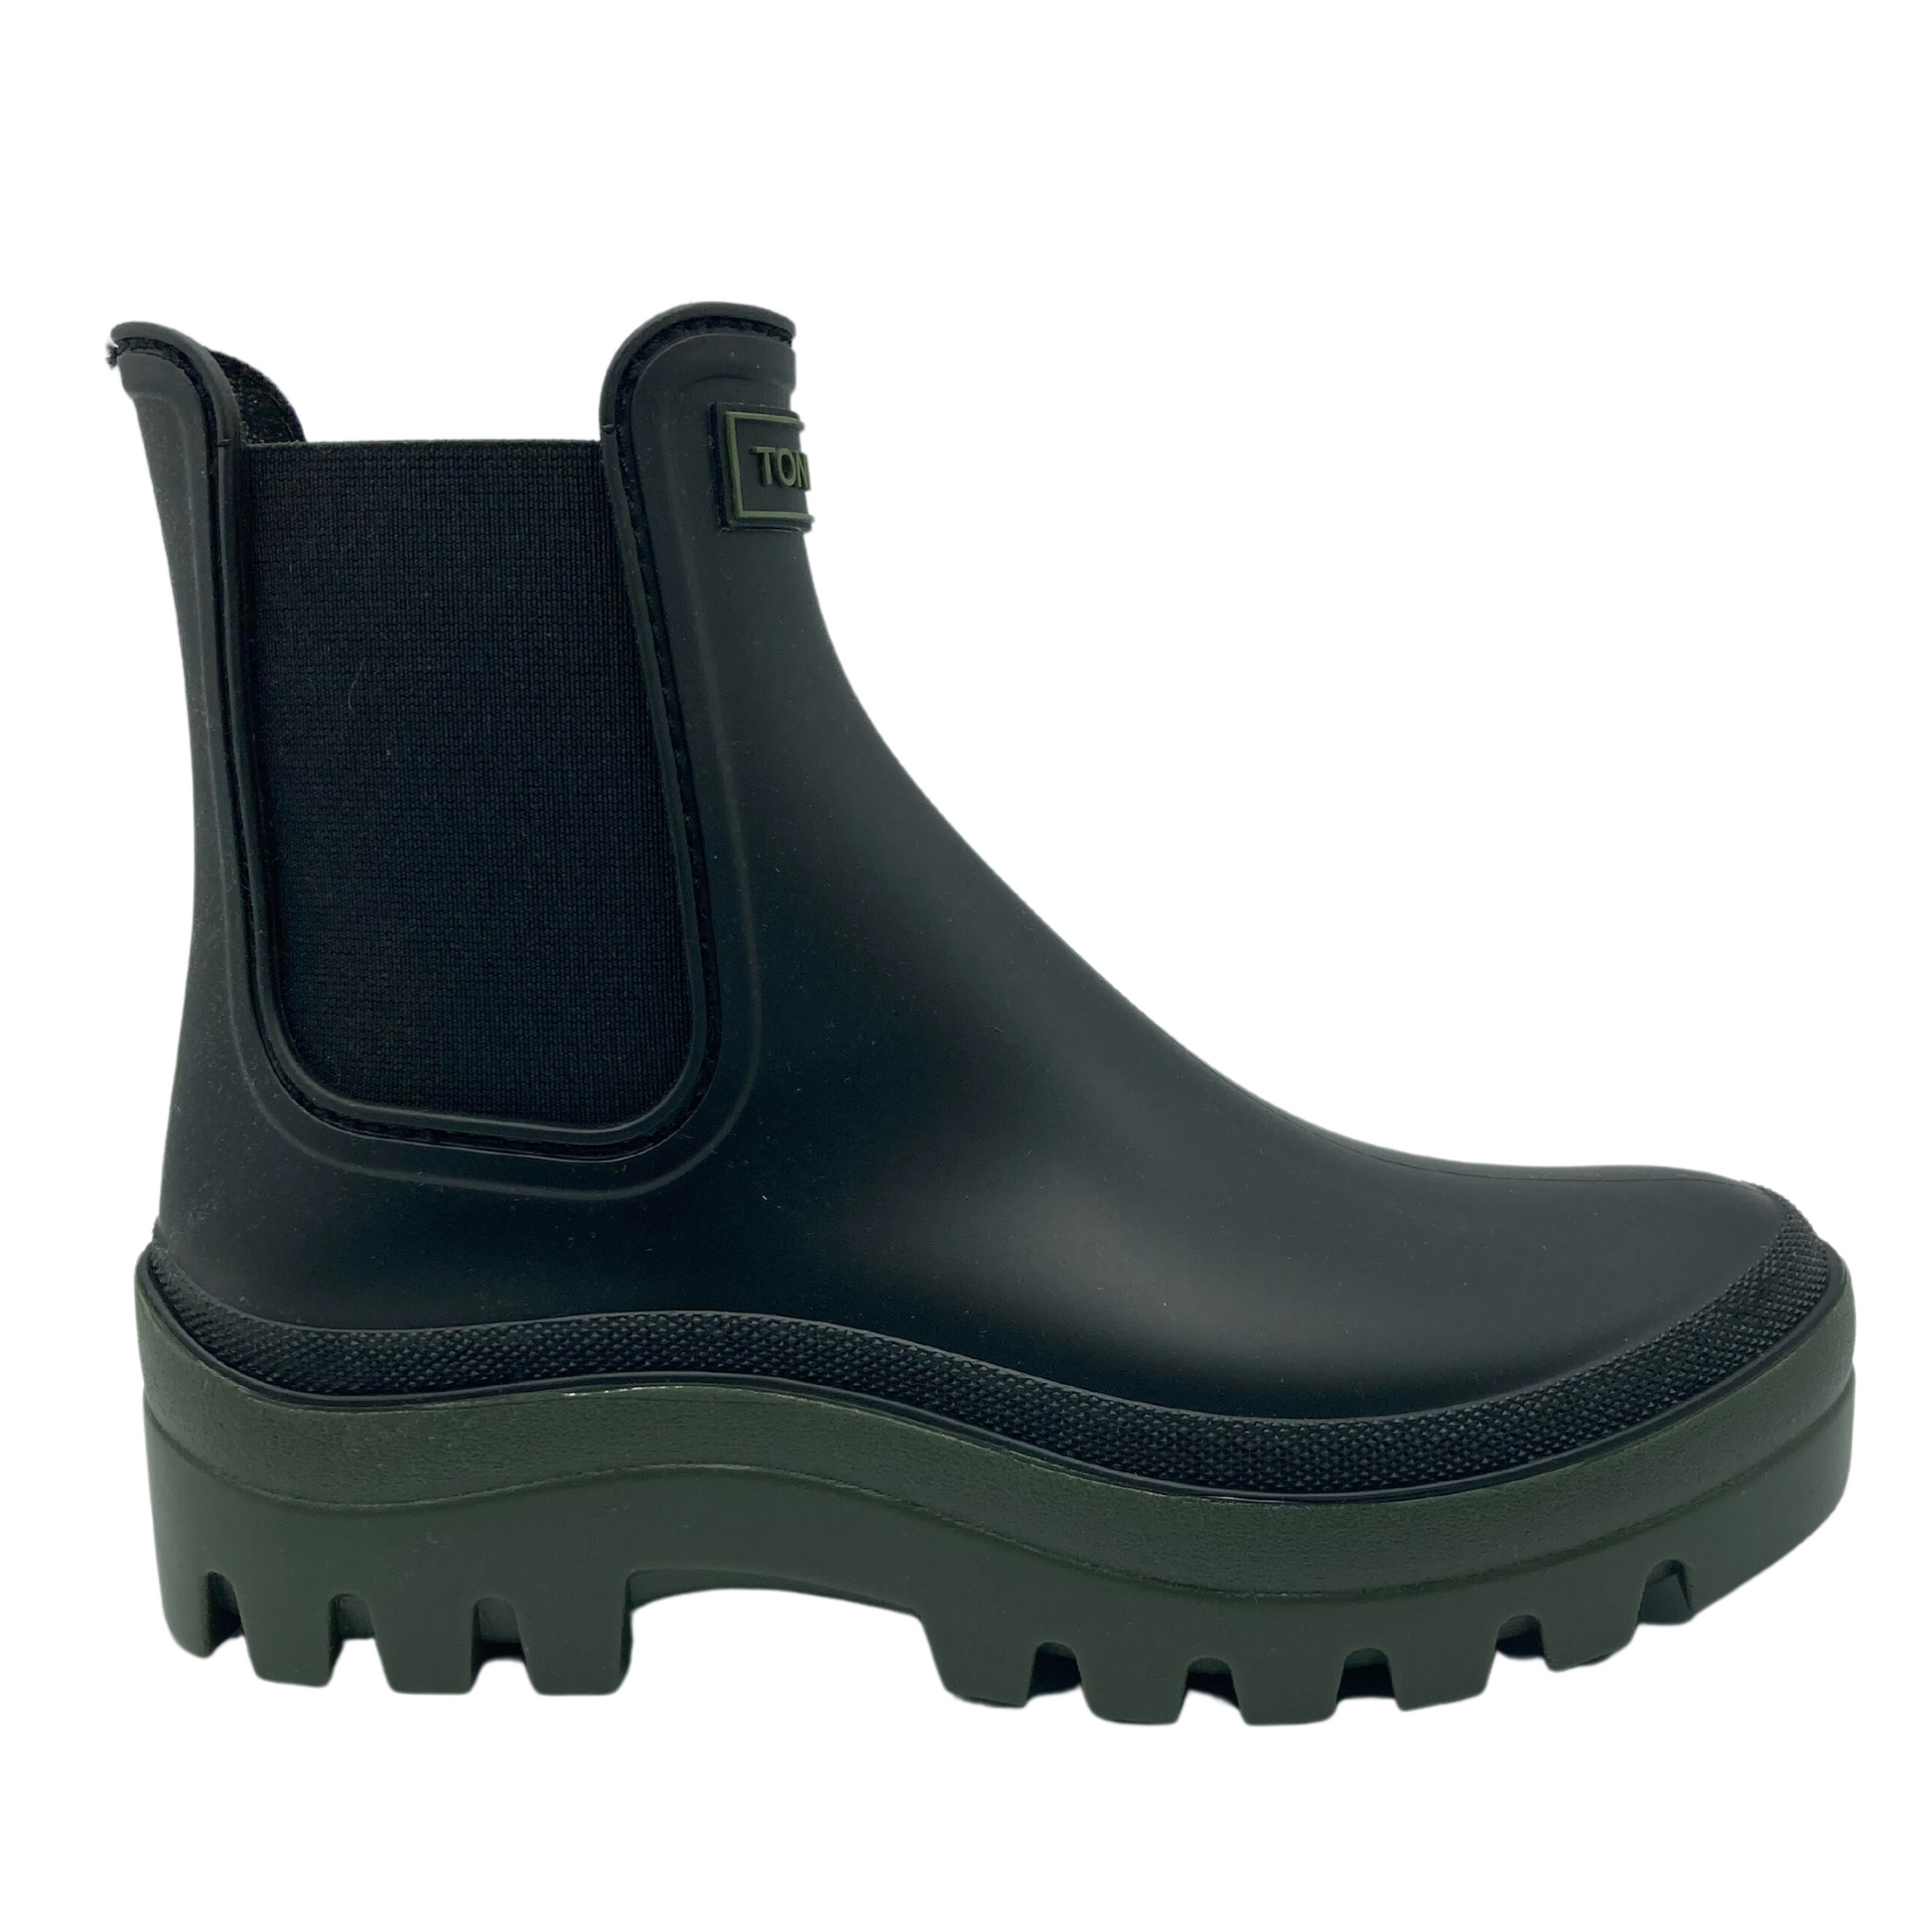 Right facing view of black chelsea boot with elastic sides and khaki platform sole